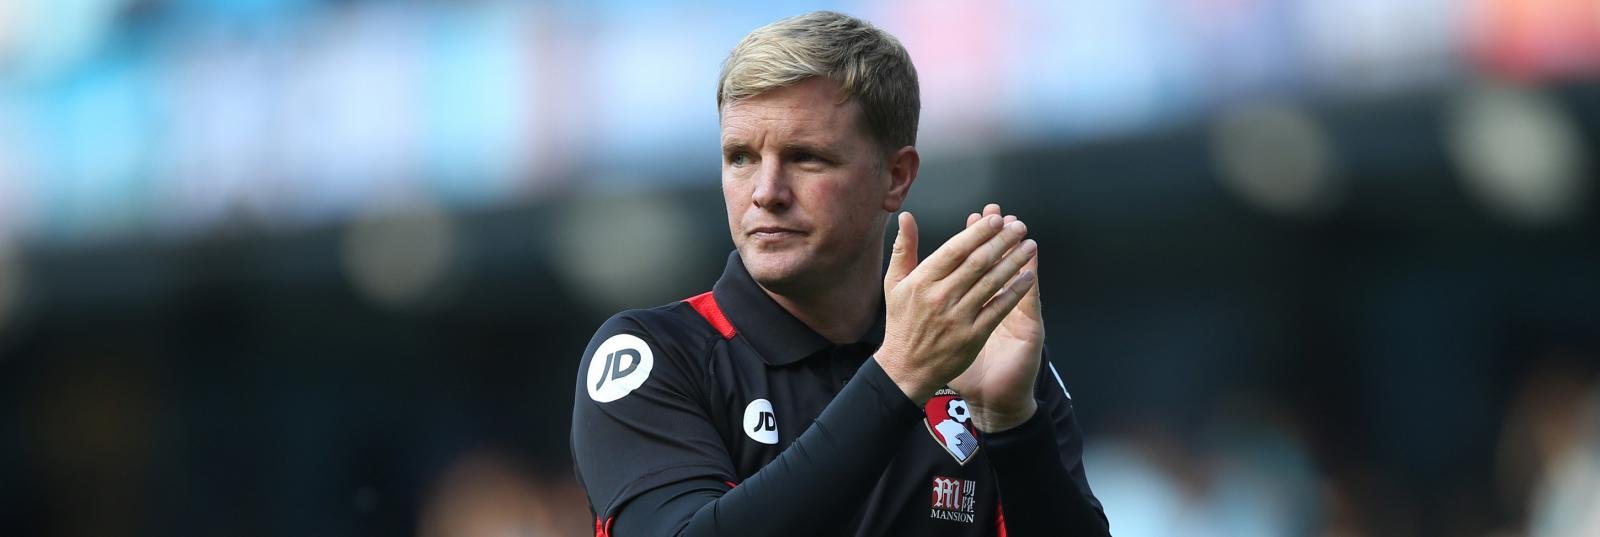 Eddie Howe would guide England to the 2018 World Cup with 9 wins from 10